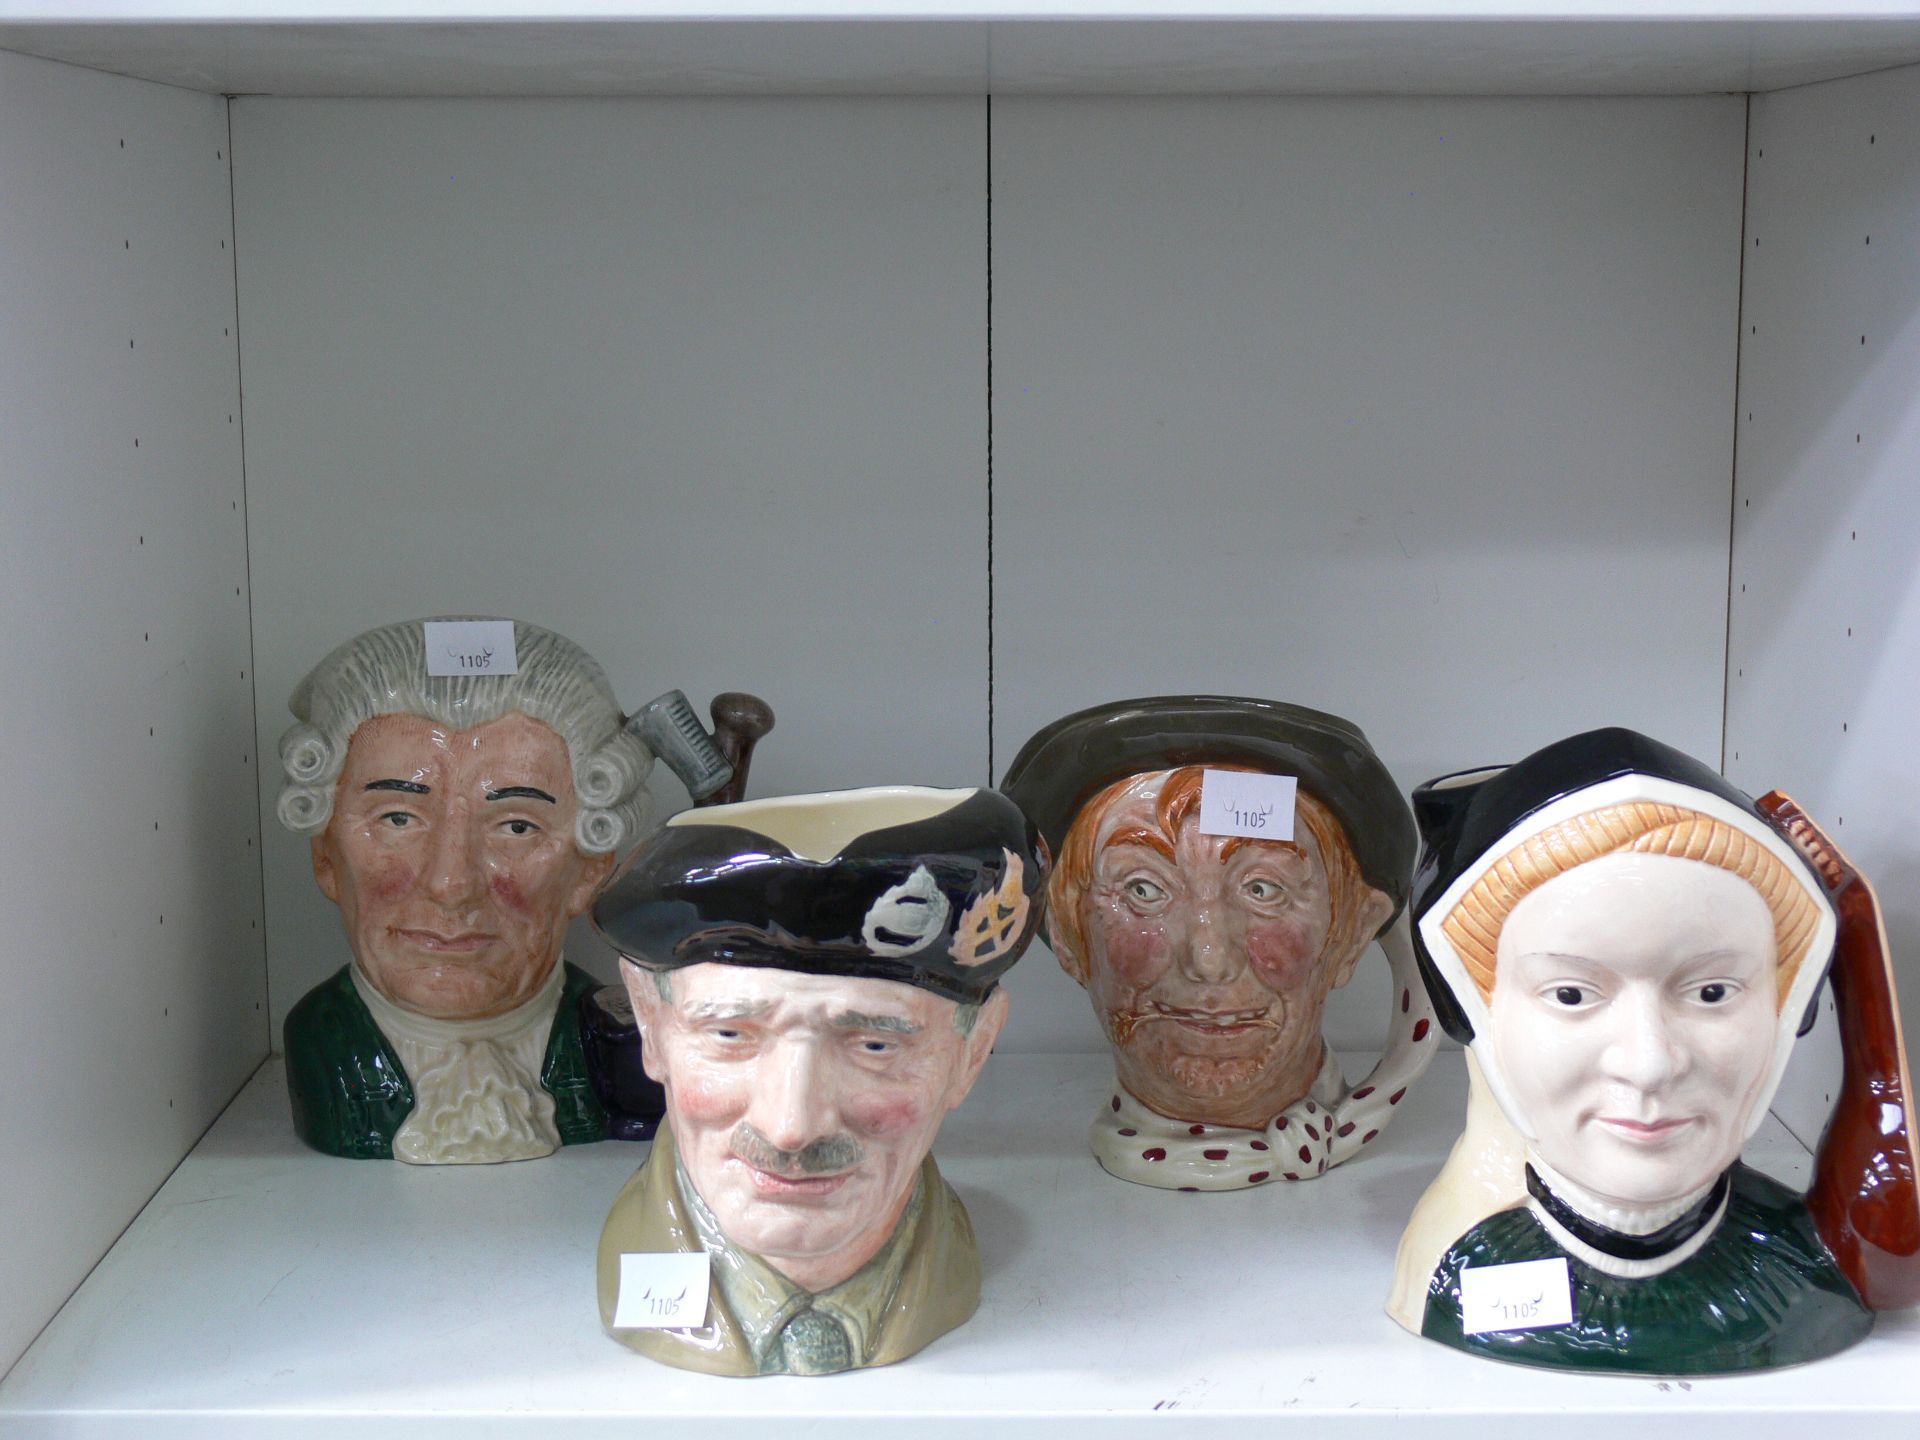 Four Royal Doulton Toby Characters to include Jane Seymour - D6646, Monty - D6202, Jarge - 857577